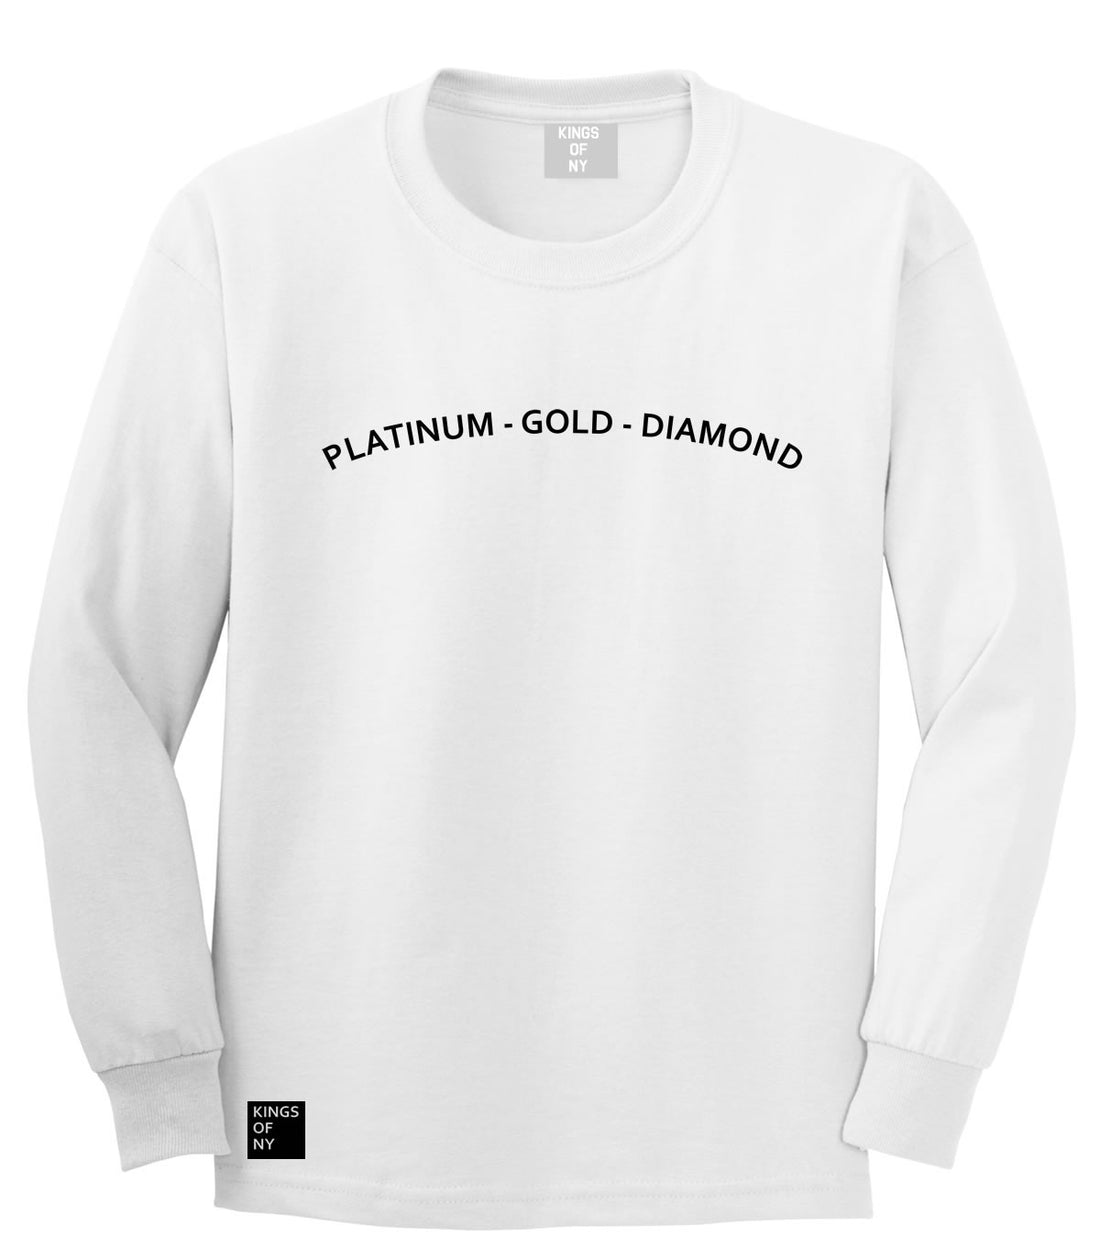 Platinum Gold Diamond Long Sleeve T-Shirt in White by Kings Of NY